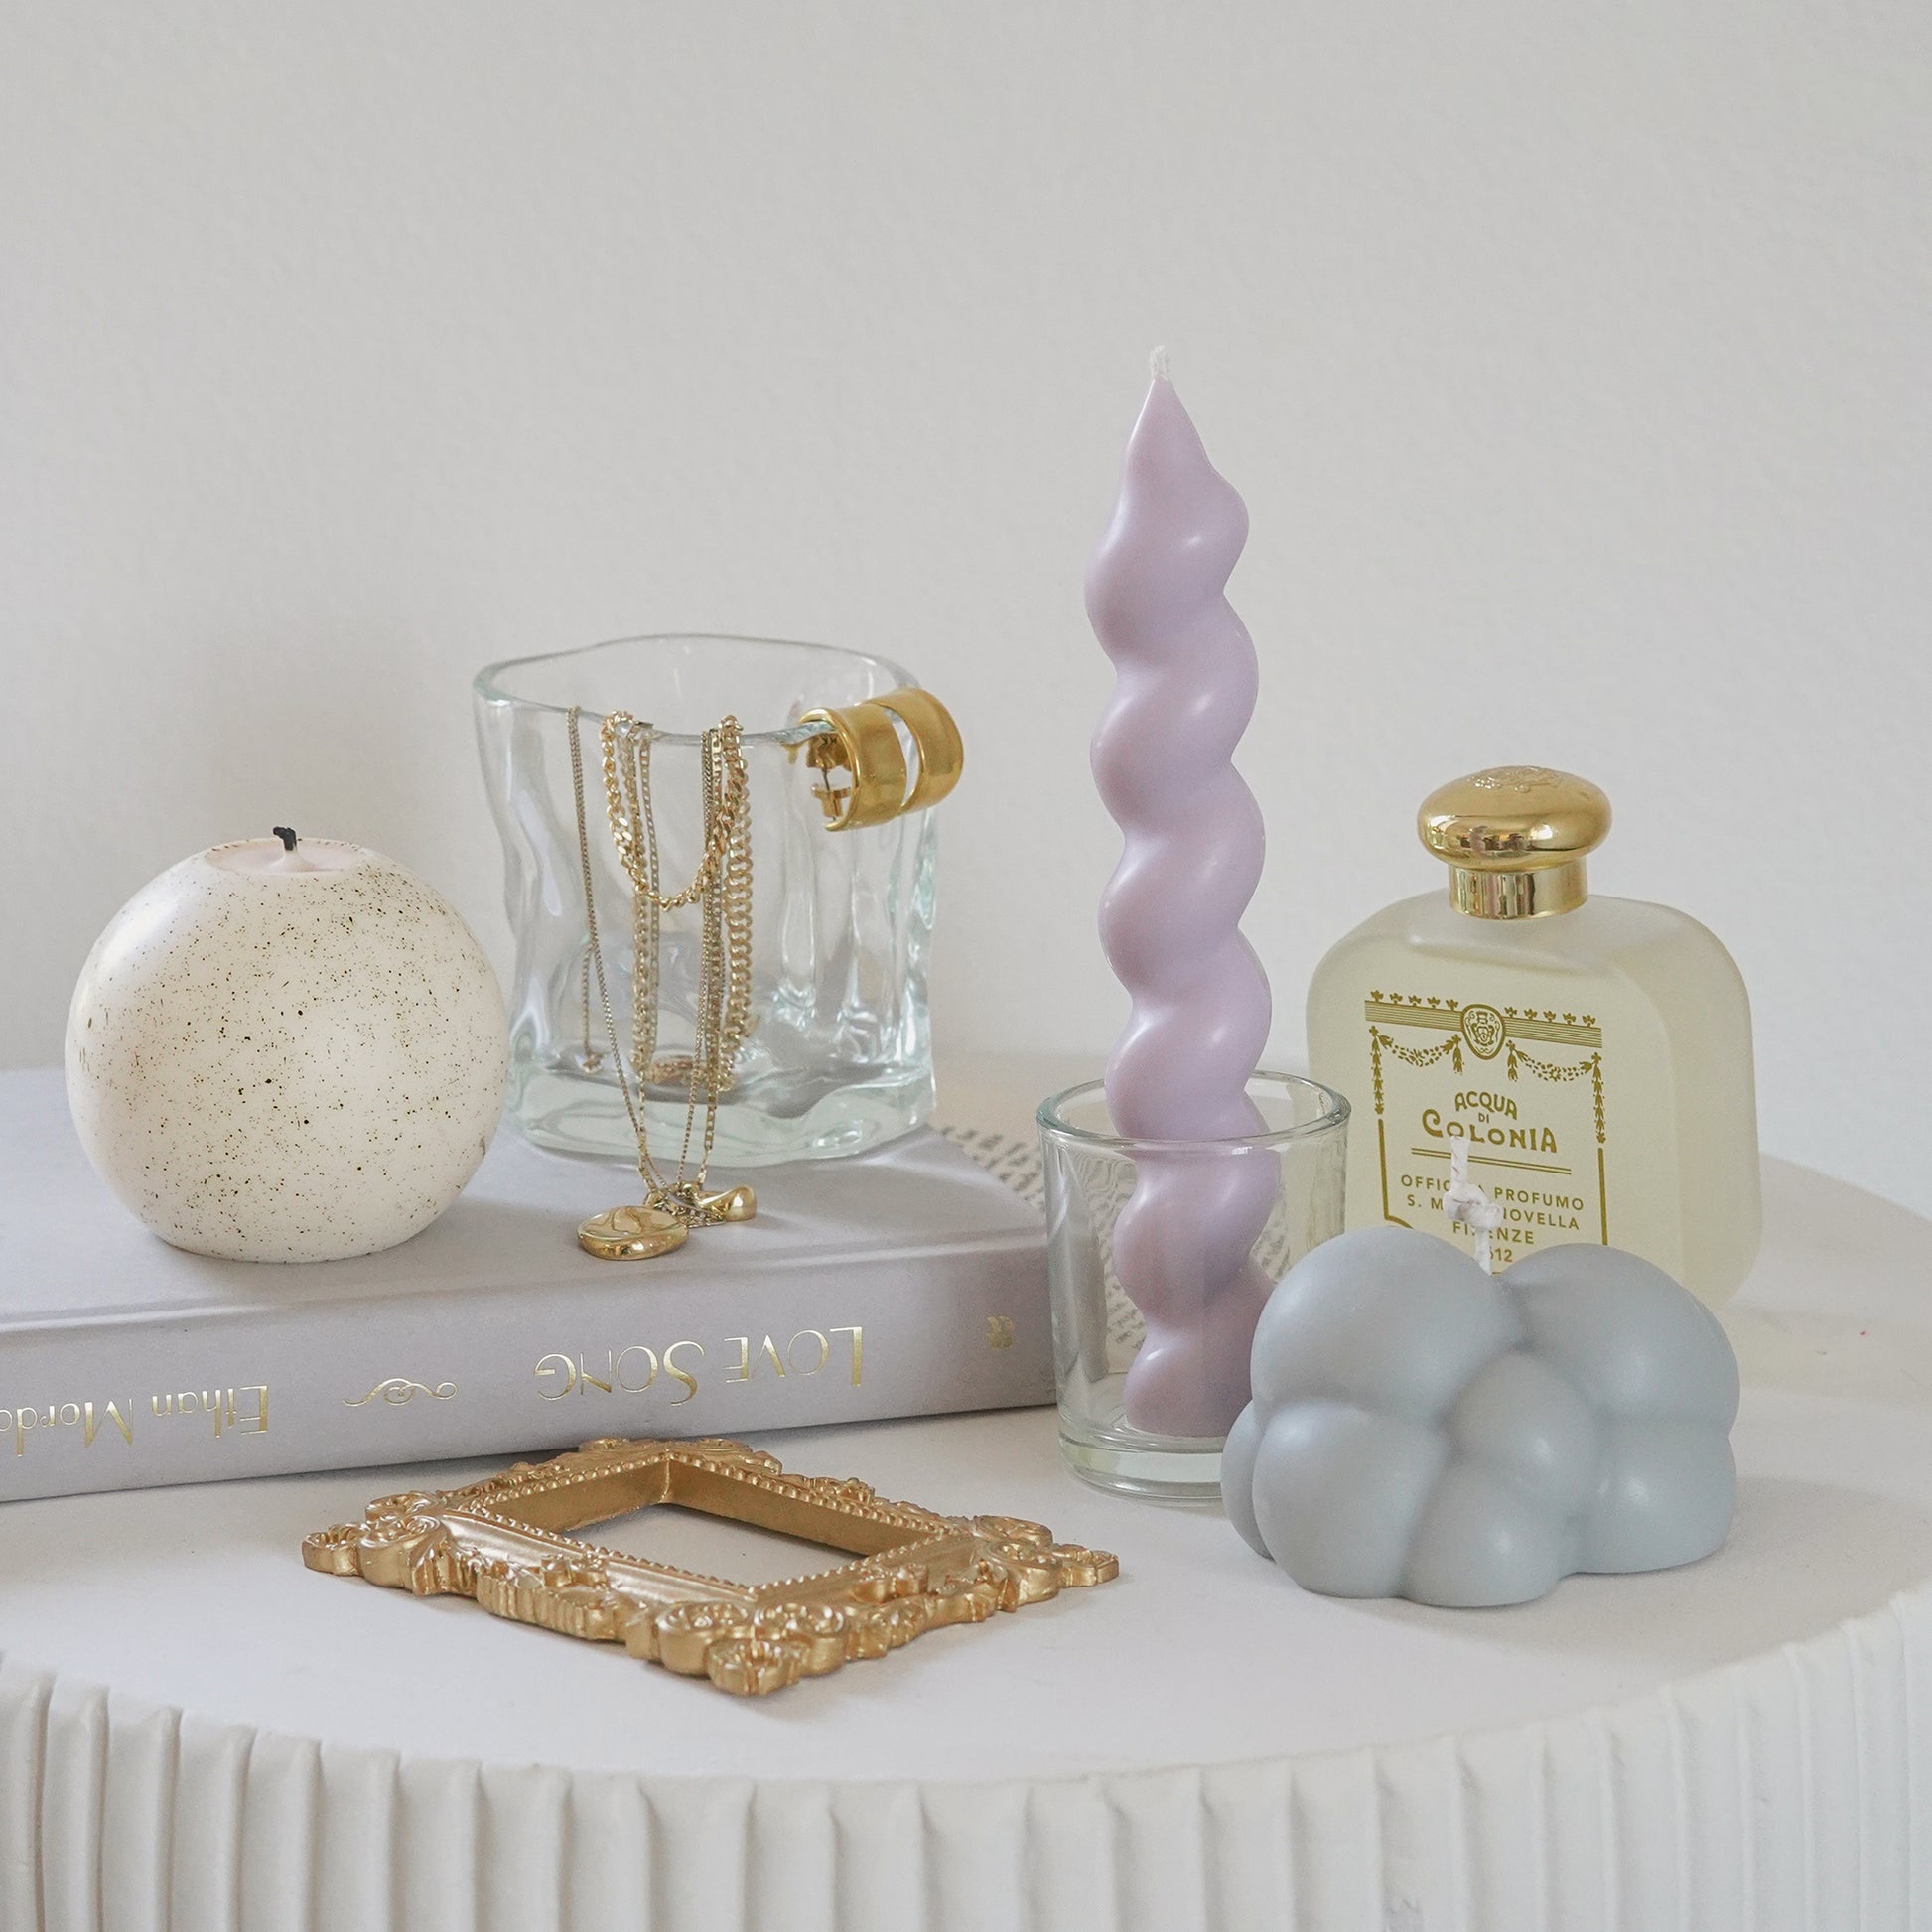 a lavender wavy spiral taper soy pillar candle in a glass, gray cloud soy candle, mini gold french picture frame, santa maria novella perfume, a dotted pattern white round sphere soy pillar candle, and jewelry hanging on wavy glass